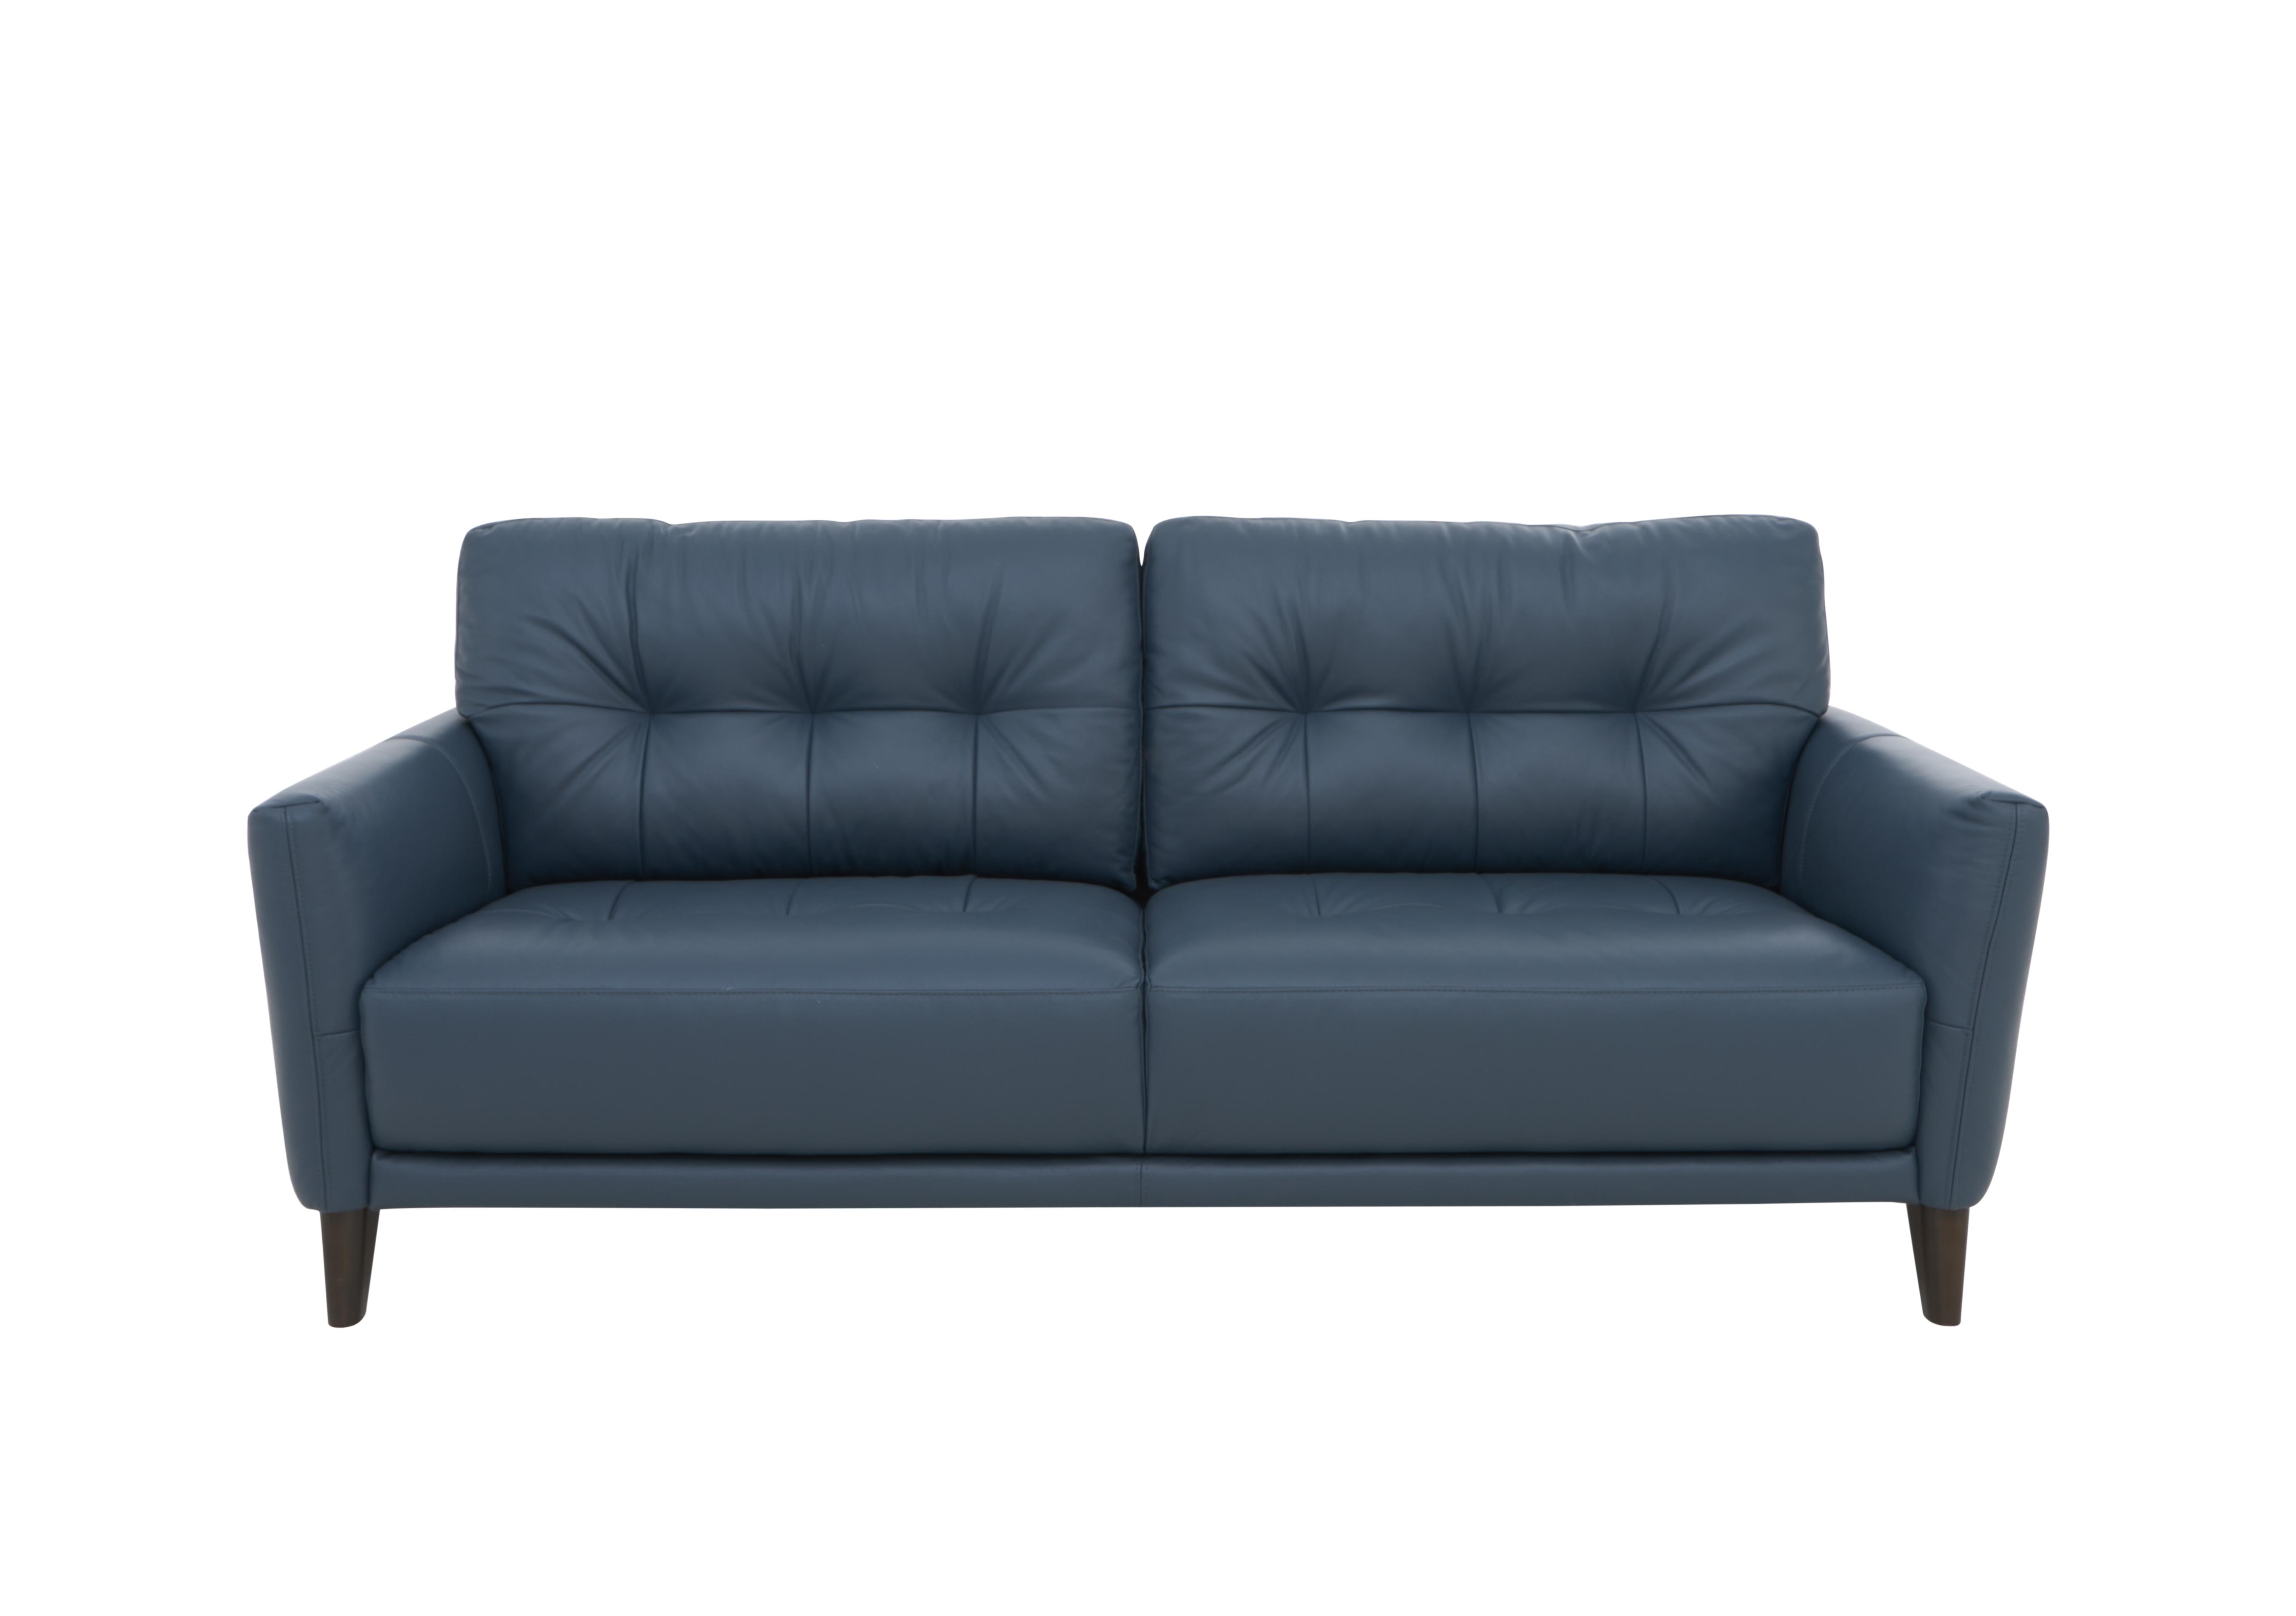 Uno Leather 3 Seater Sofa in Bv-313e Ocean Blue on Furniture Village